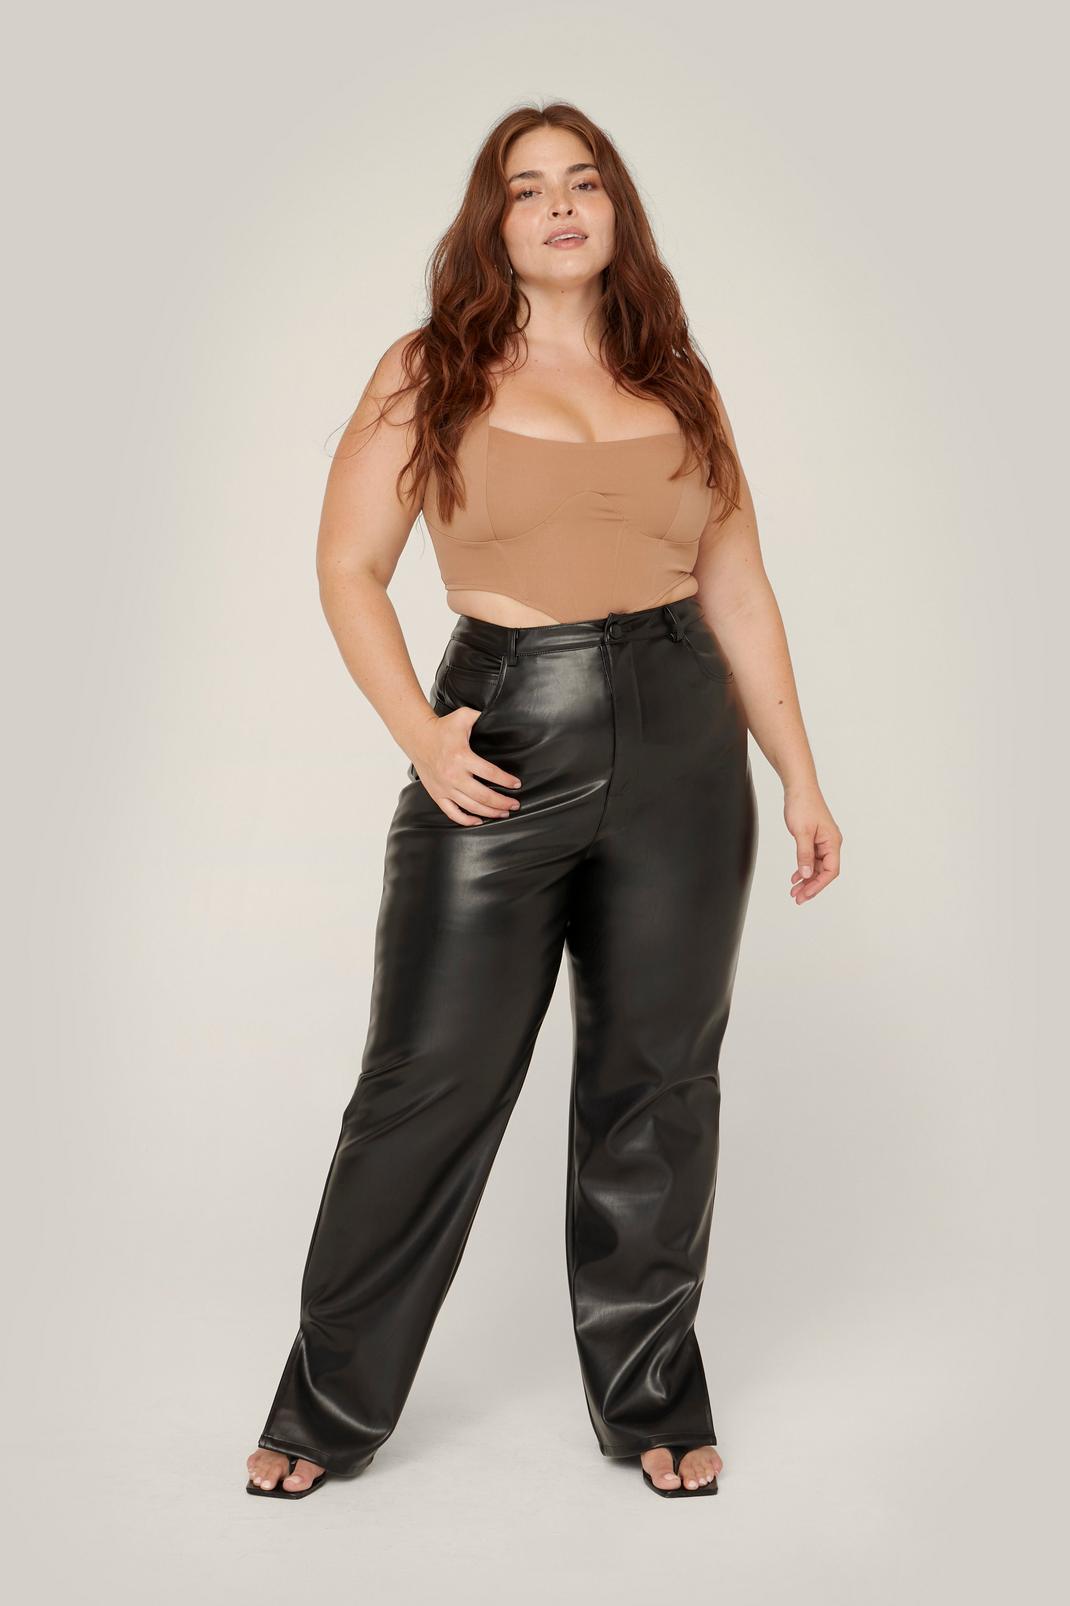 Loving these plus size leather trousers from ELVI!